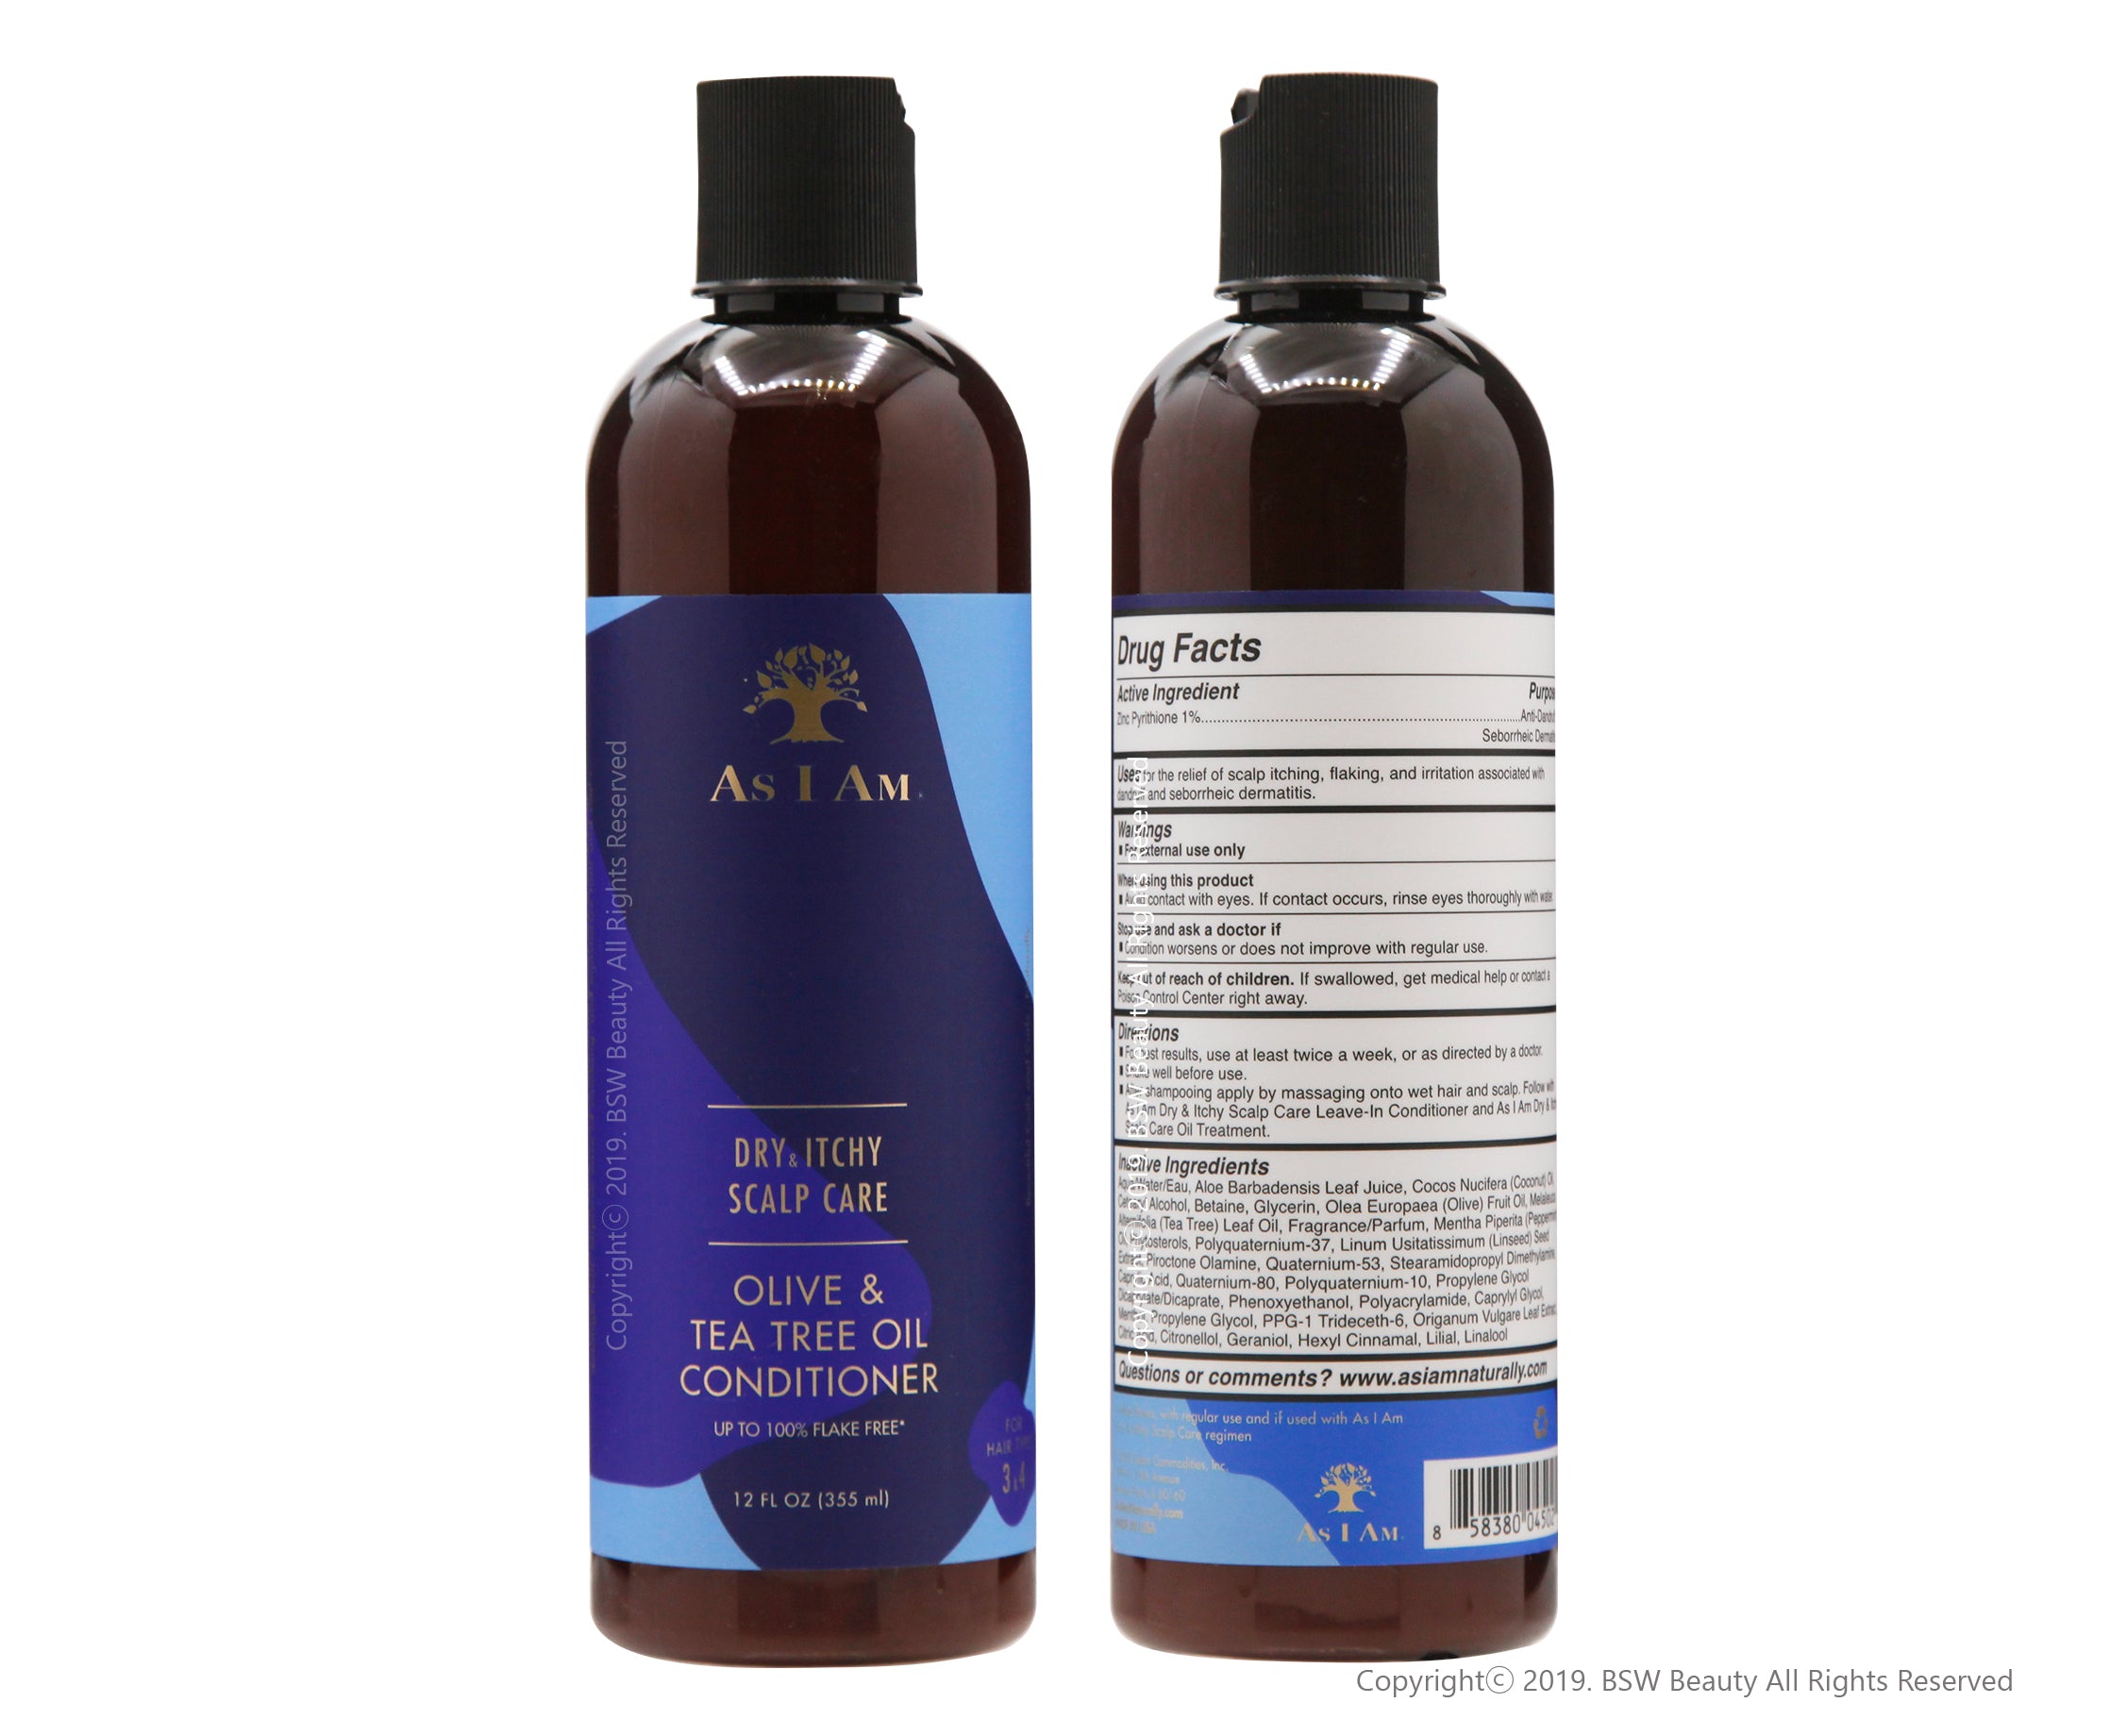 AS I AM DRY & ITCHY SCALP CARE OLIVE & TEA TREE OIL CONDITIONER 12oz